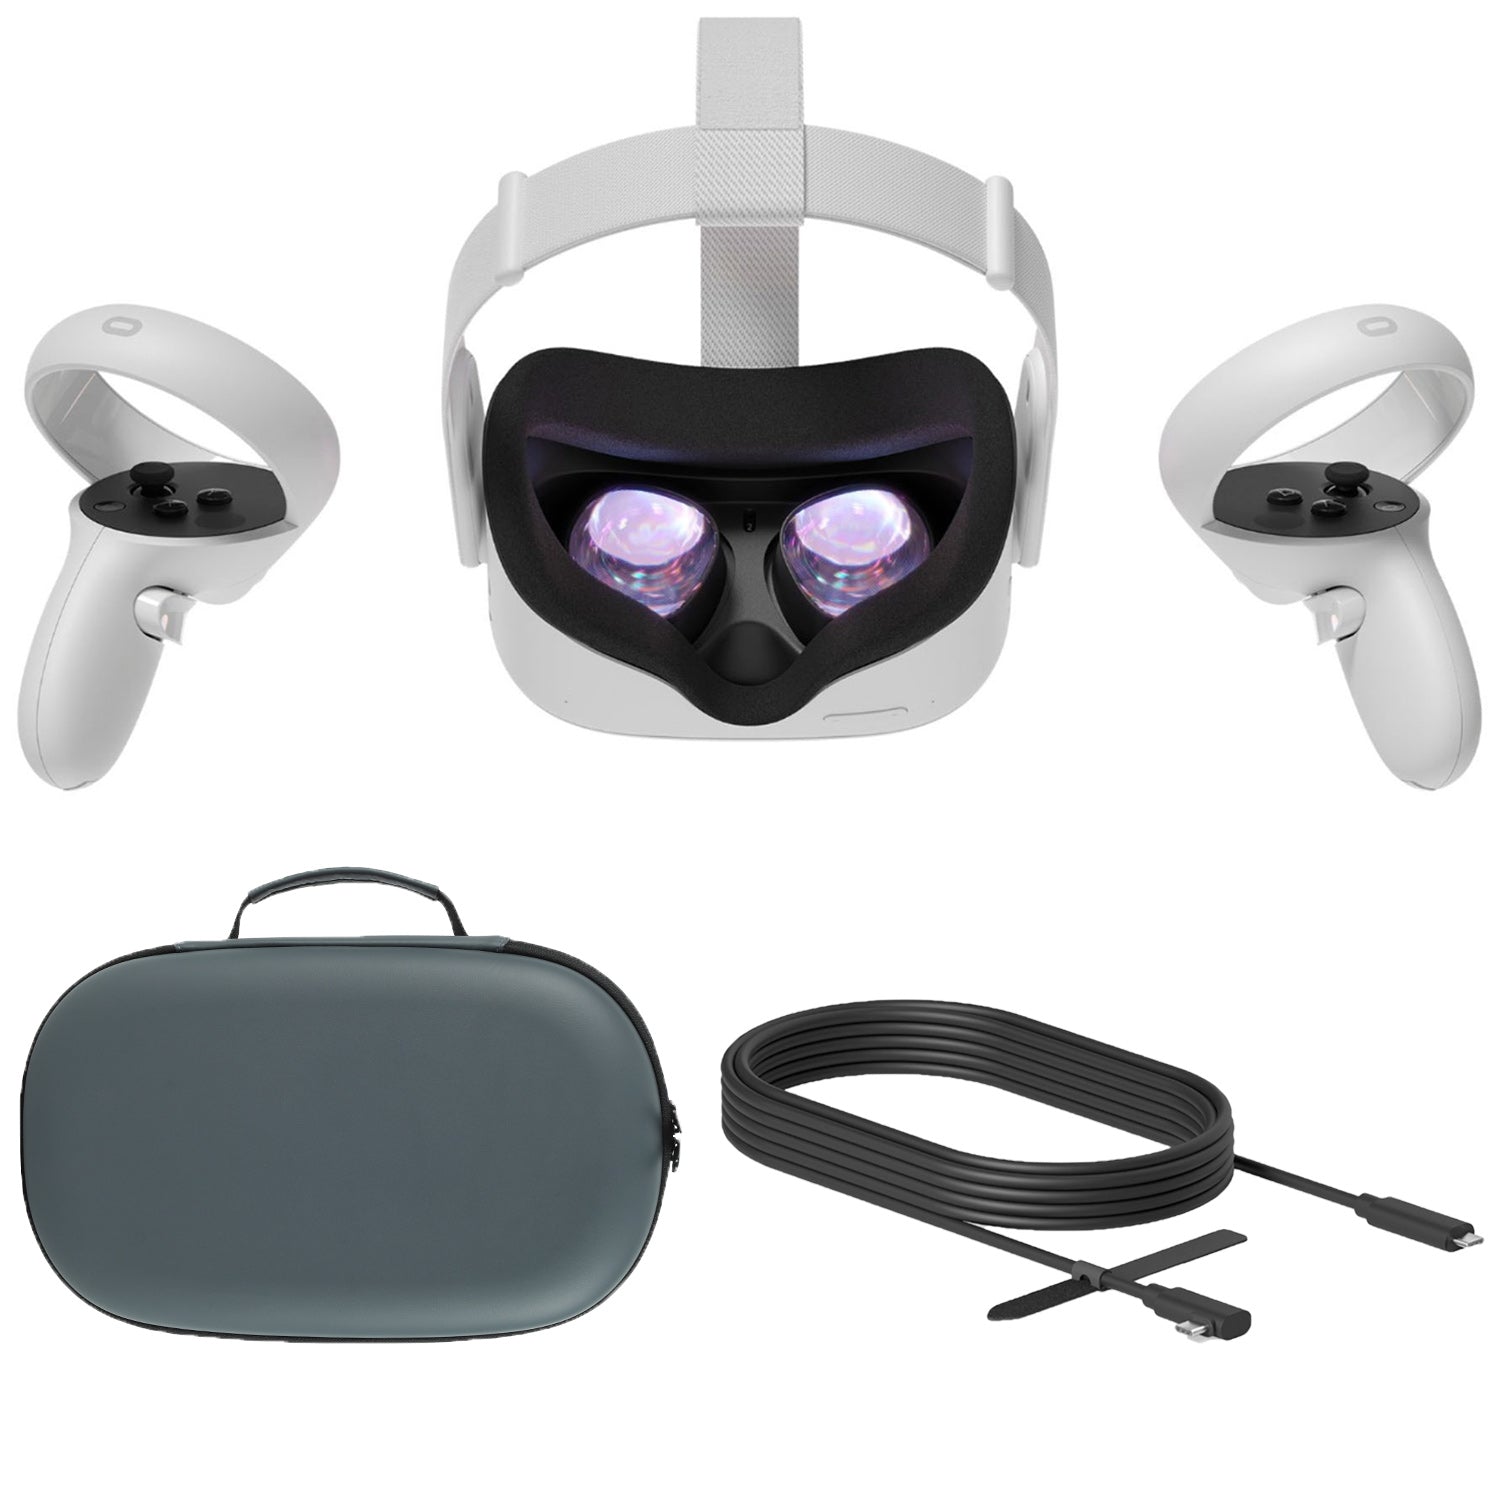 2020 Oculus Quest 2 All-In-One VR Headset, Touch Controllers, 128GB SSD, 1832x1920 up to 90 Hz Refresh Rate LCD, Glasses Compatible, 3D Audio, Mytrix Carrying Case, USB-C PC VR Cable (3M)